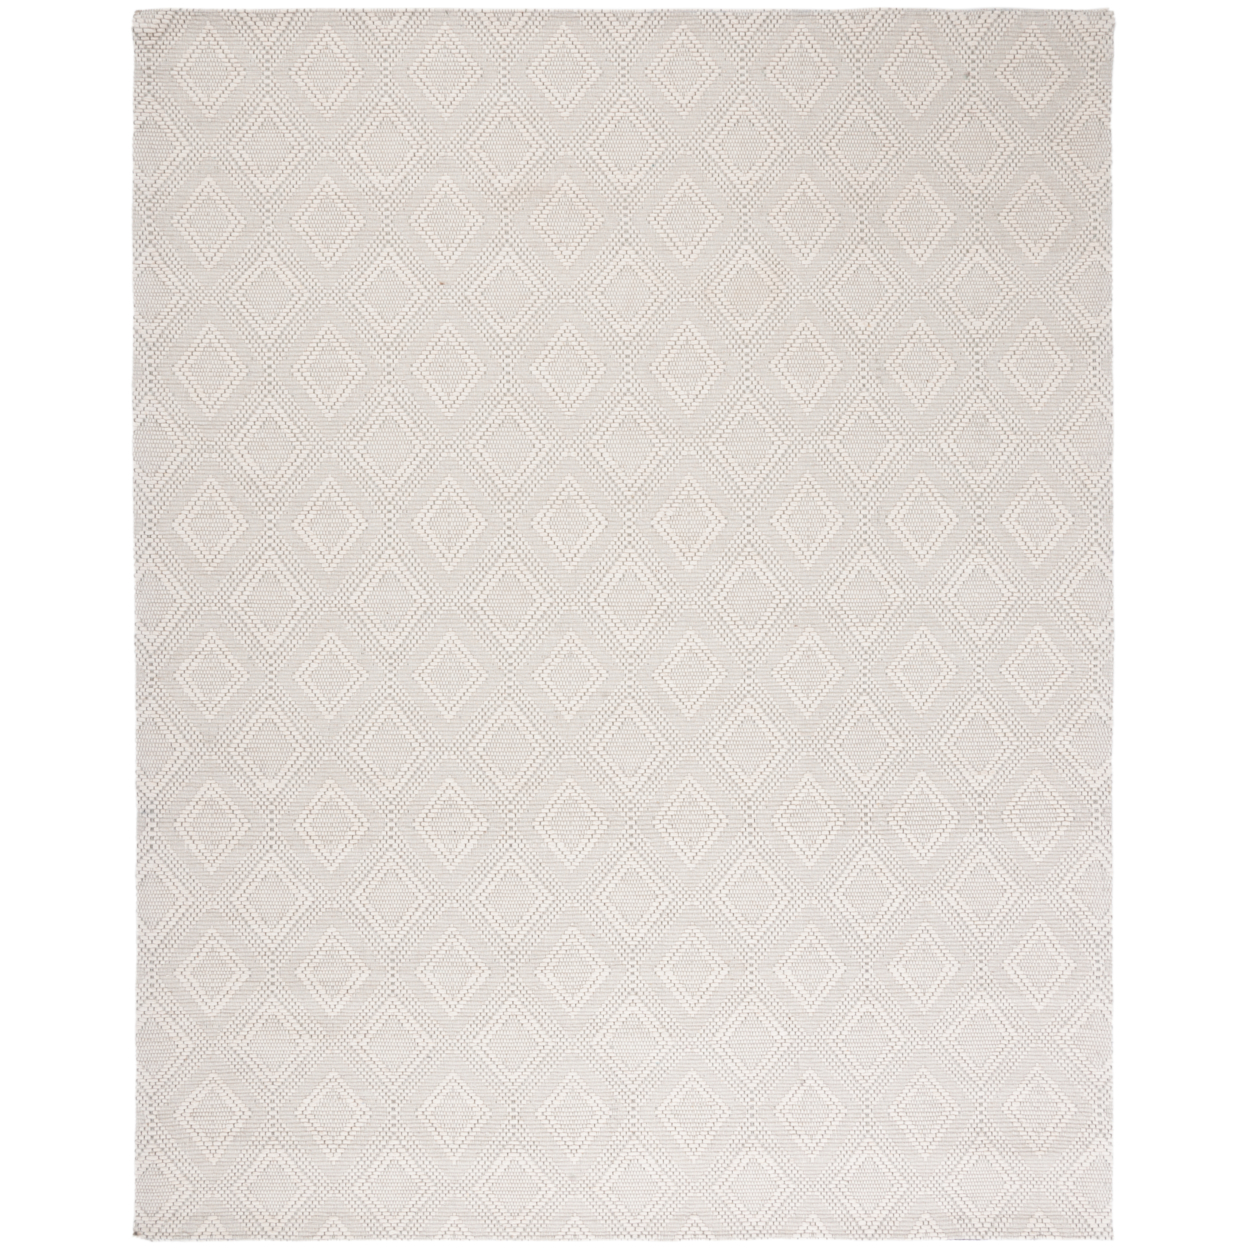 SAFAVIEH Marbella Collection MRB306A Handwoven Ivory Rug - 8' X 10'